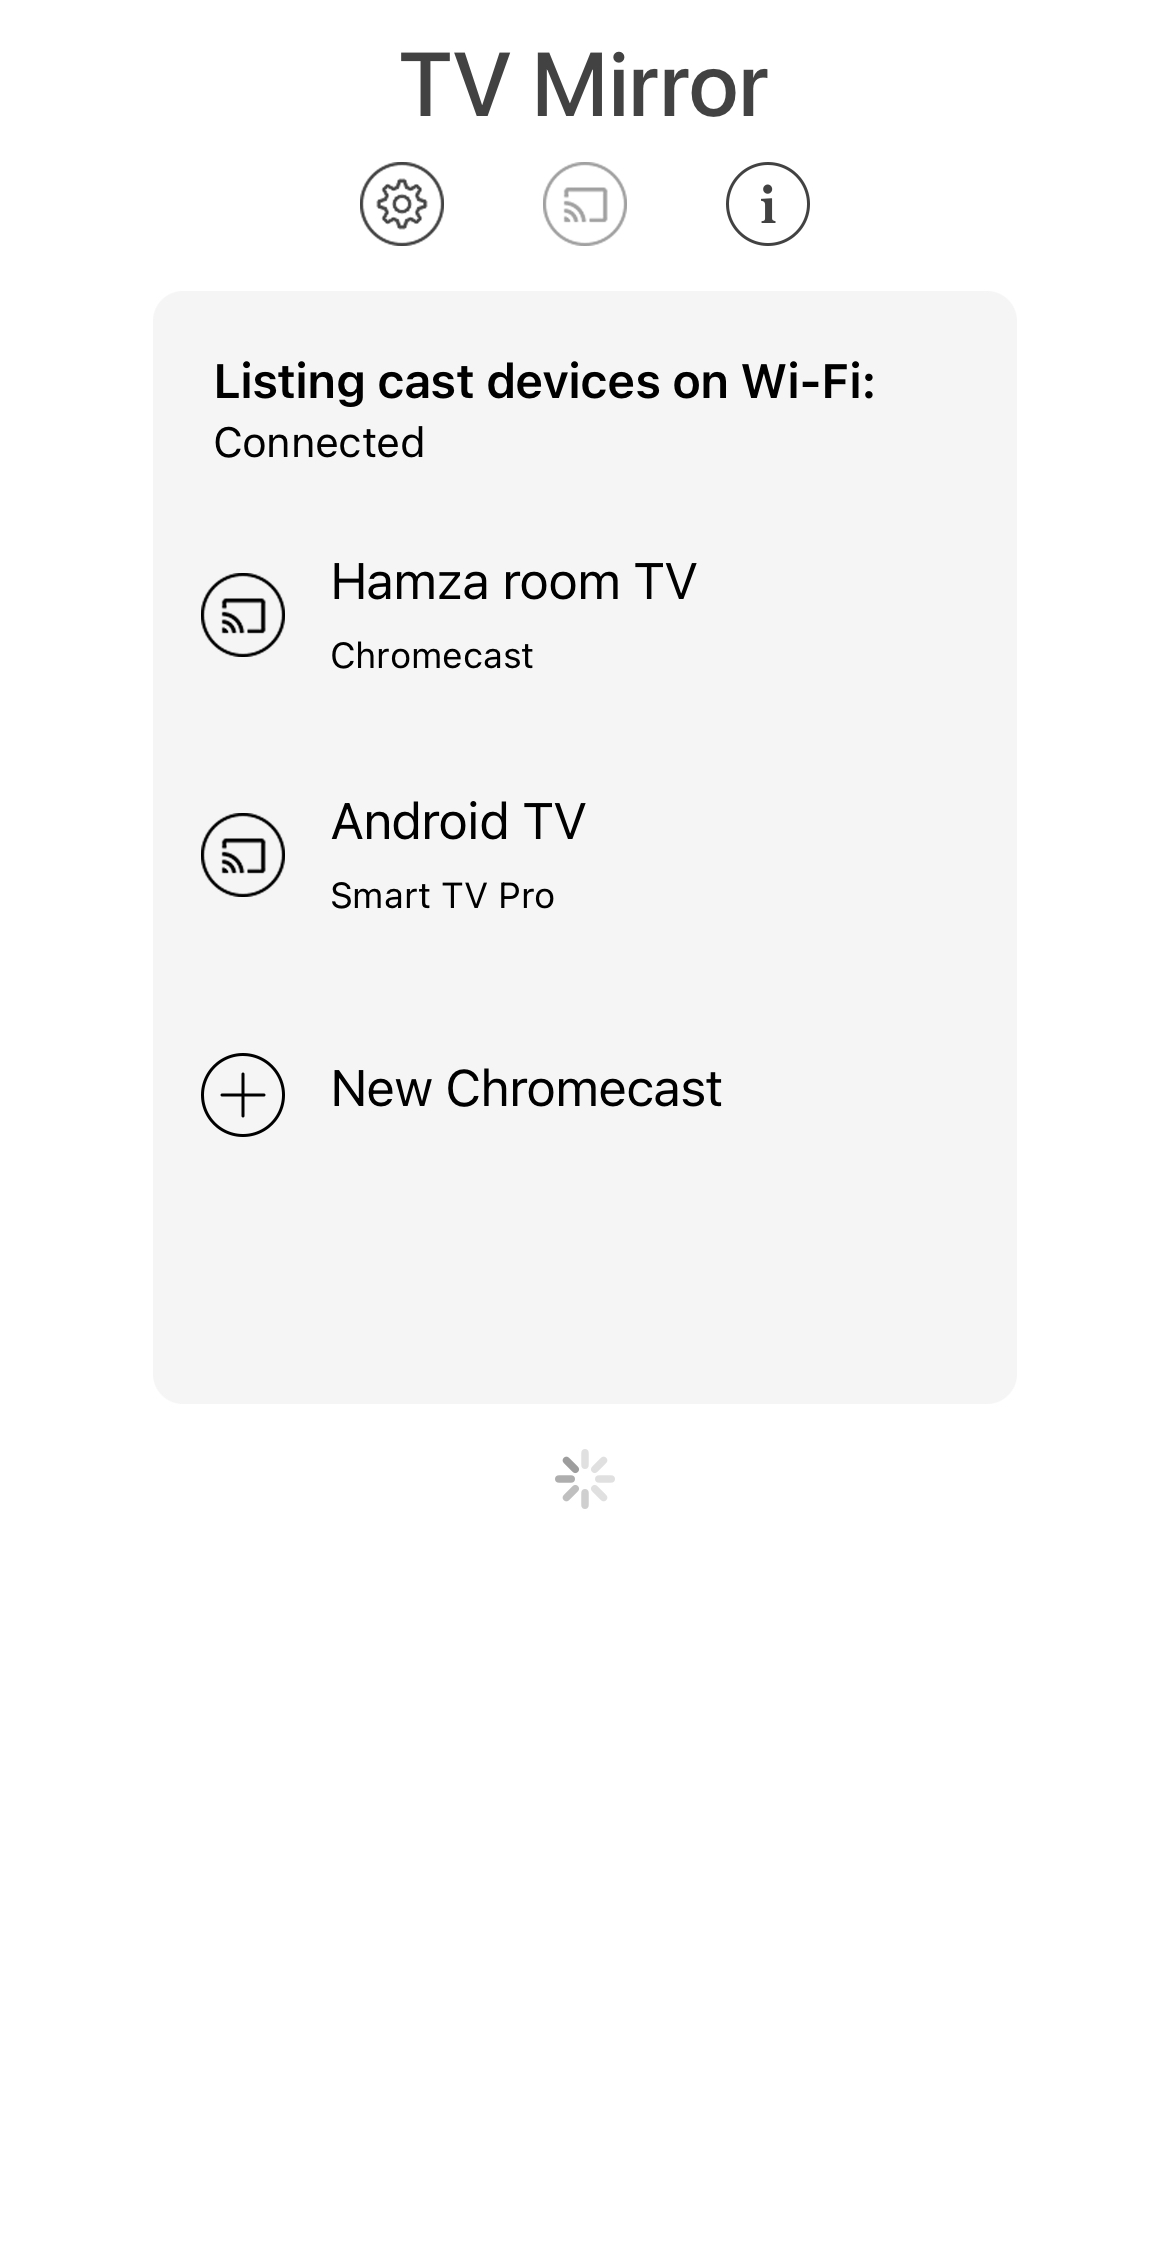 Connecting to your Chromecast using a third-party app